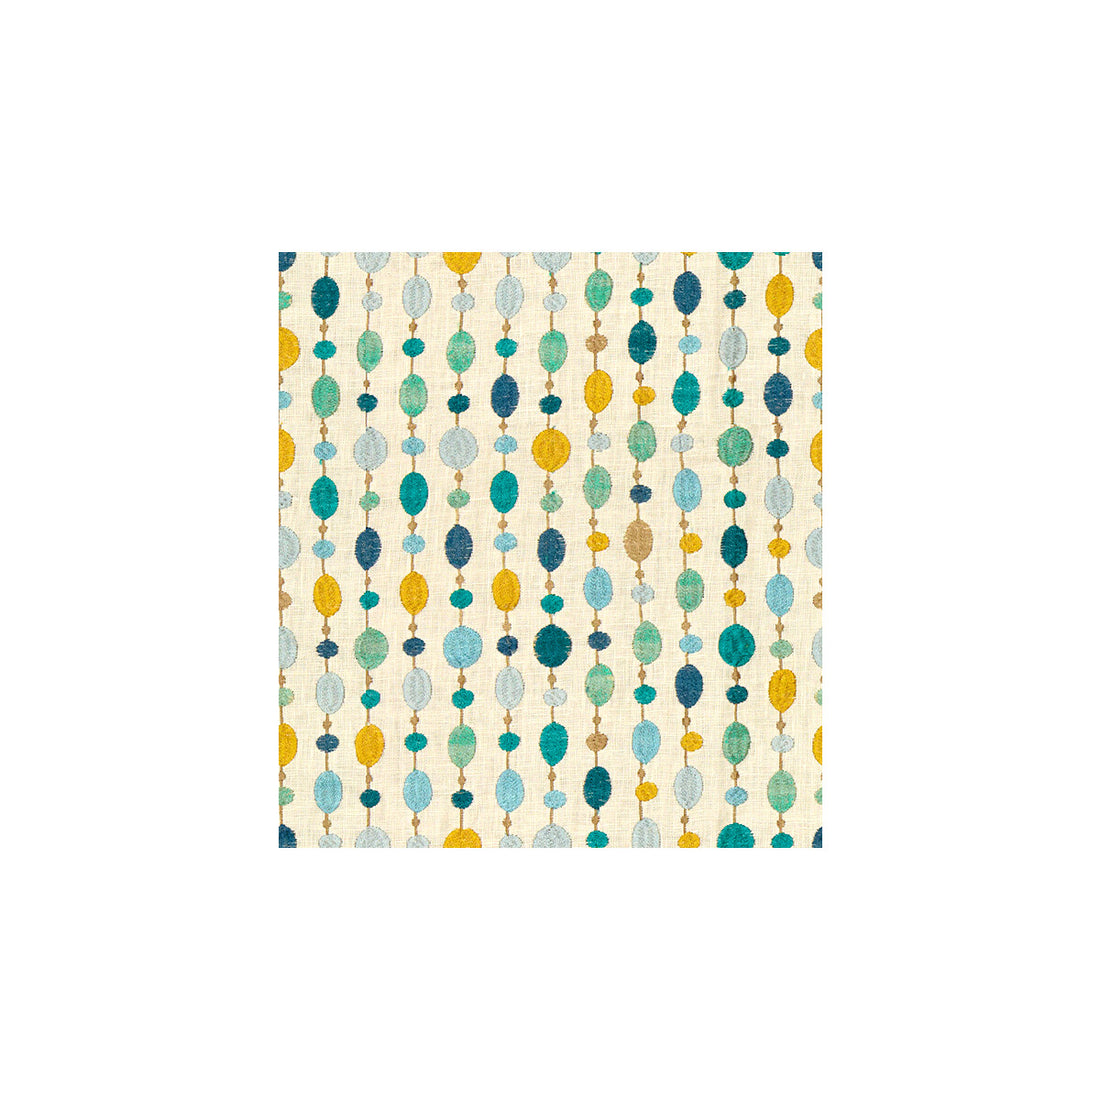 Beaded Linen fabric in turquoise color - pattern 33071.513.0 - by Kravet Couture in the Modern Colors III collection